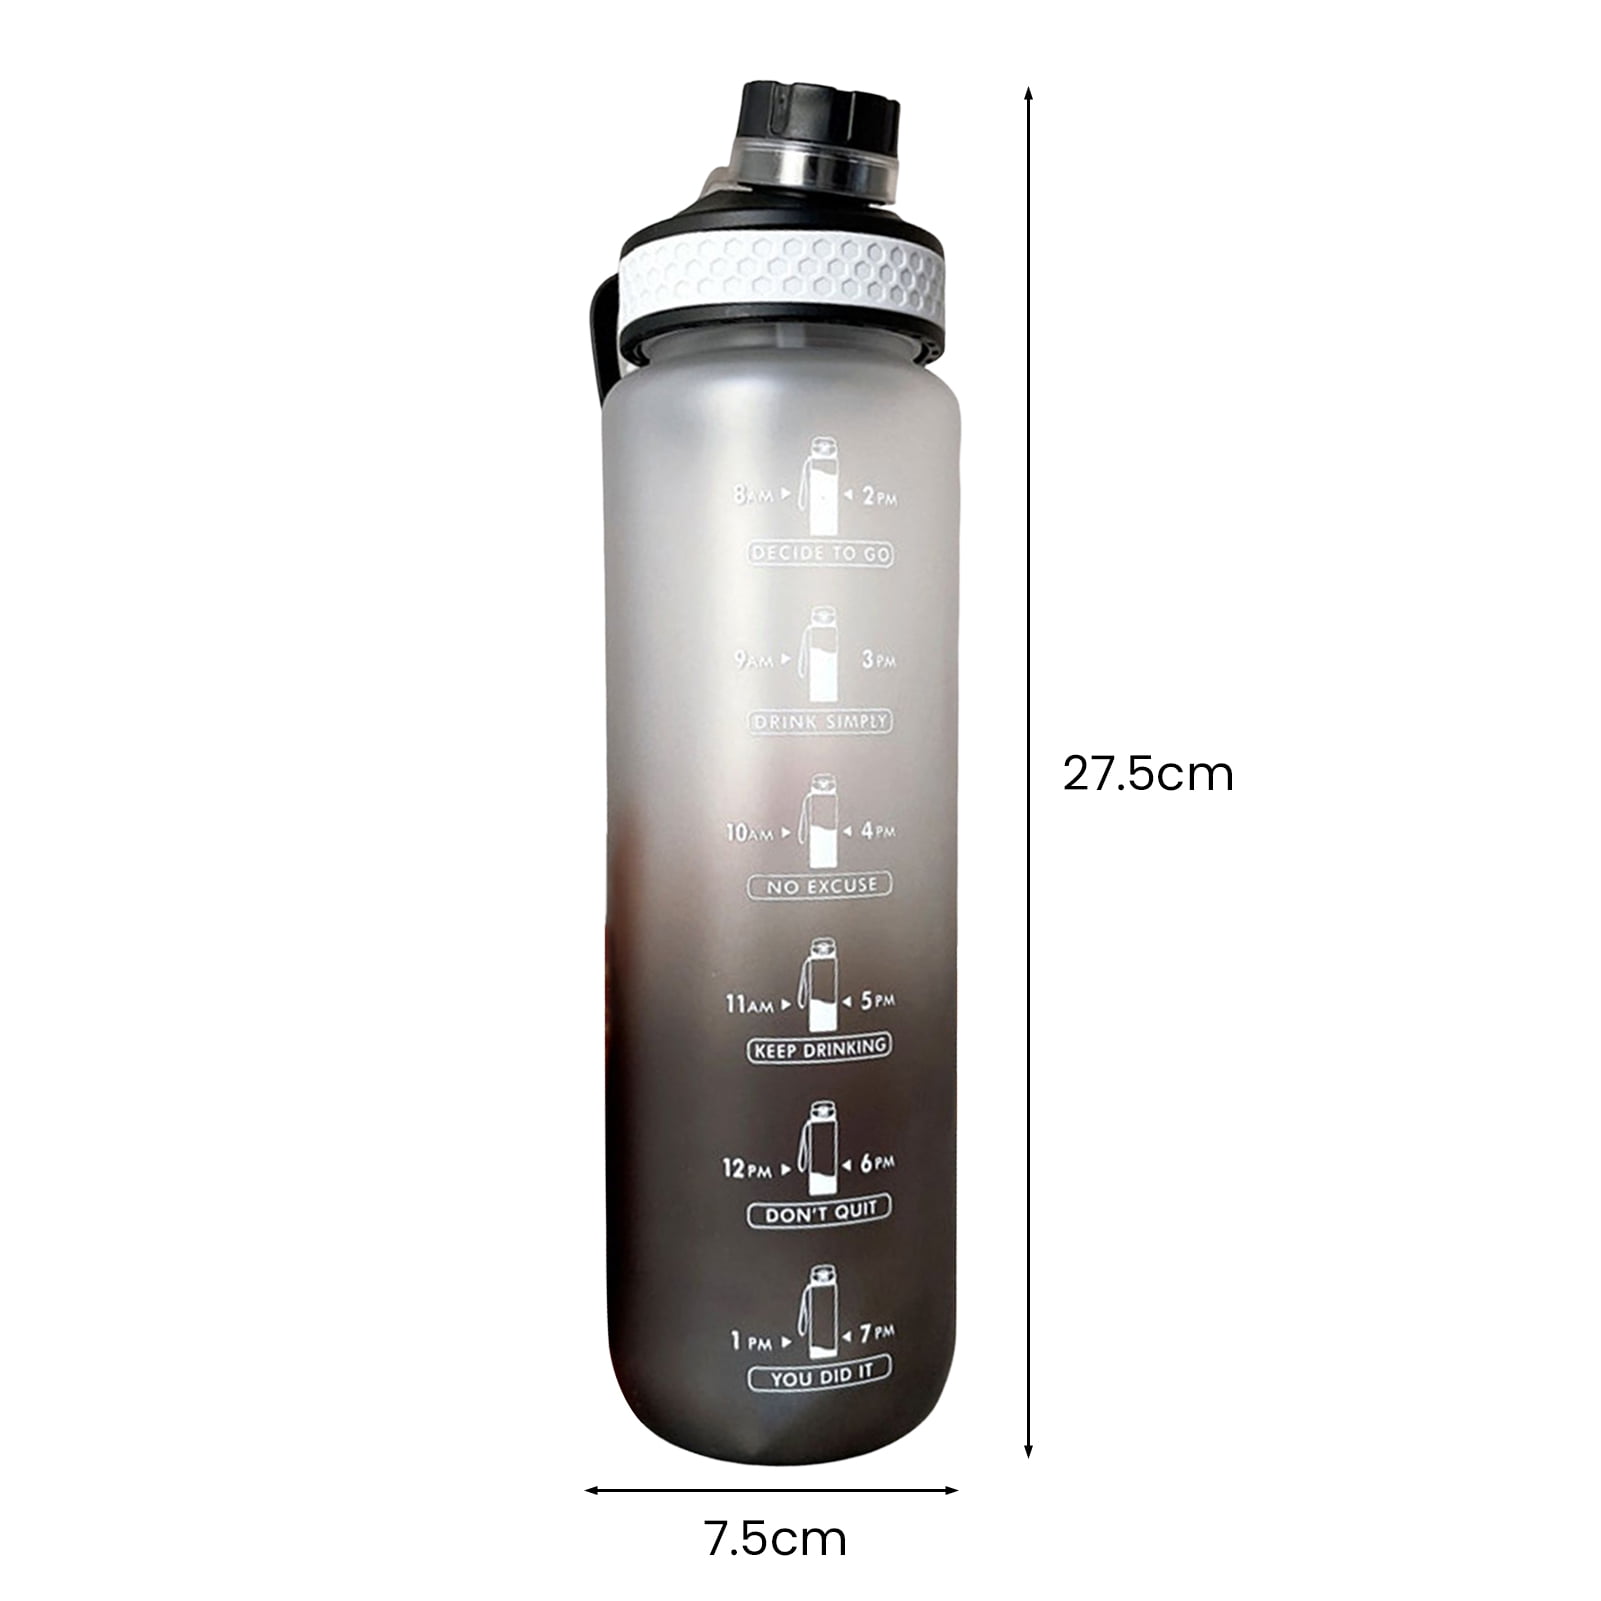 Hesroicy 260/350ml Water Bottle Insulated BPA Free Stainless Steel